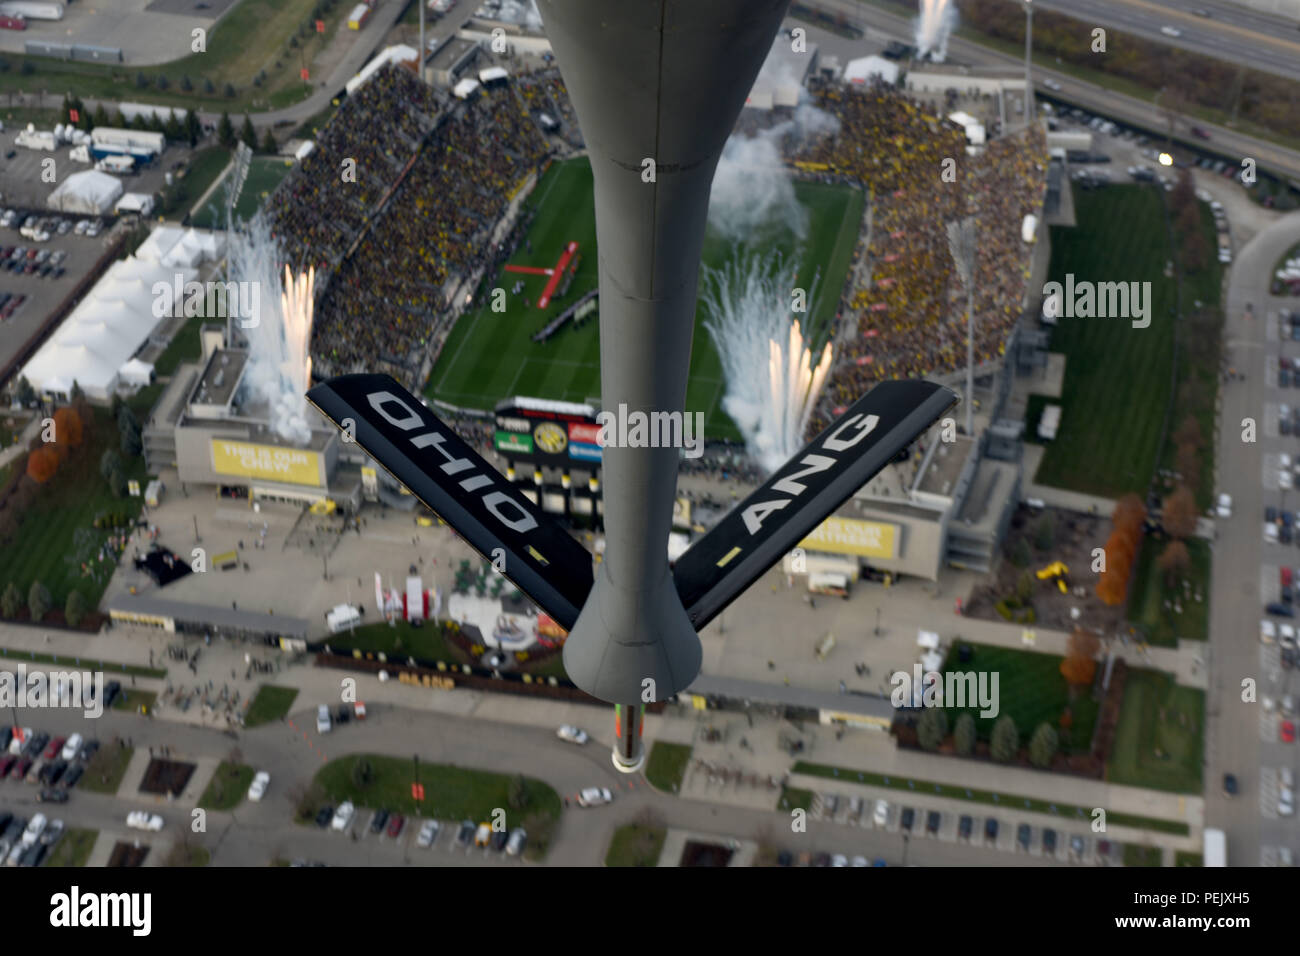 A KC-135R Stratotanker from the 121st Air Refueling Wing completes a flyover of the Mapfre Stadium in Columbus, Ohio, during the start of the Major League Soccer Cup final game Dec. 6, 2015. The Columbus Crew and the Portland Timbers played against each other for the championship cup. (U.S. Air National Guard photo by Airman 1st Class Ashley Williams/Released) Stock Photo